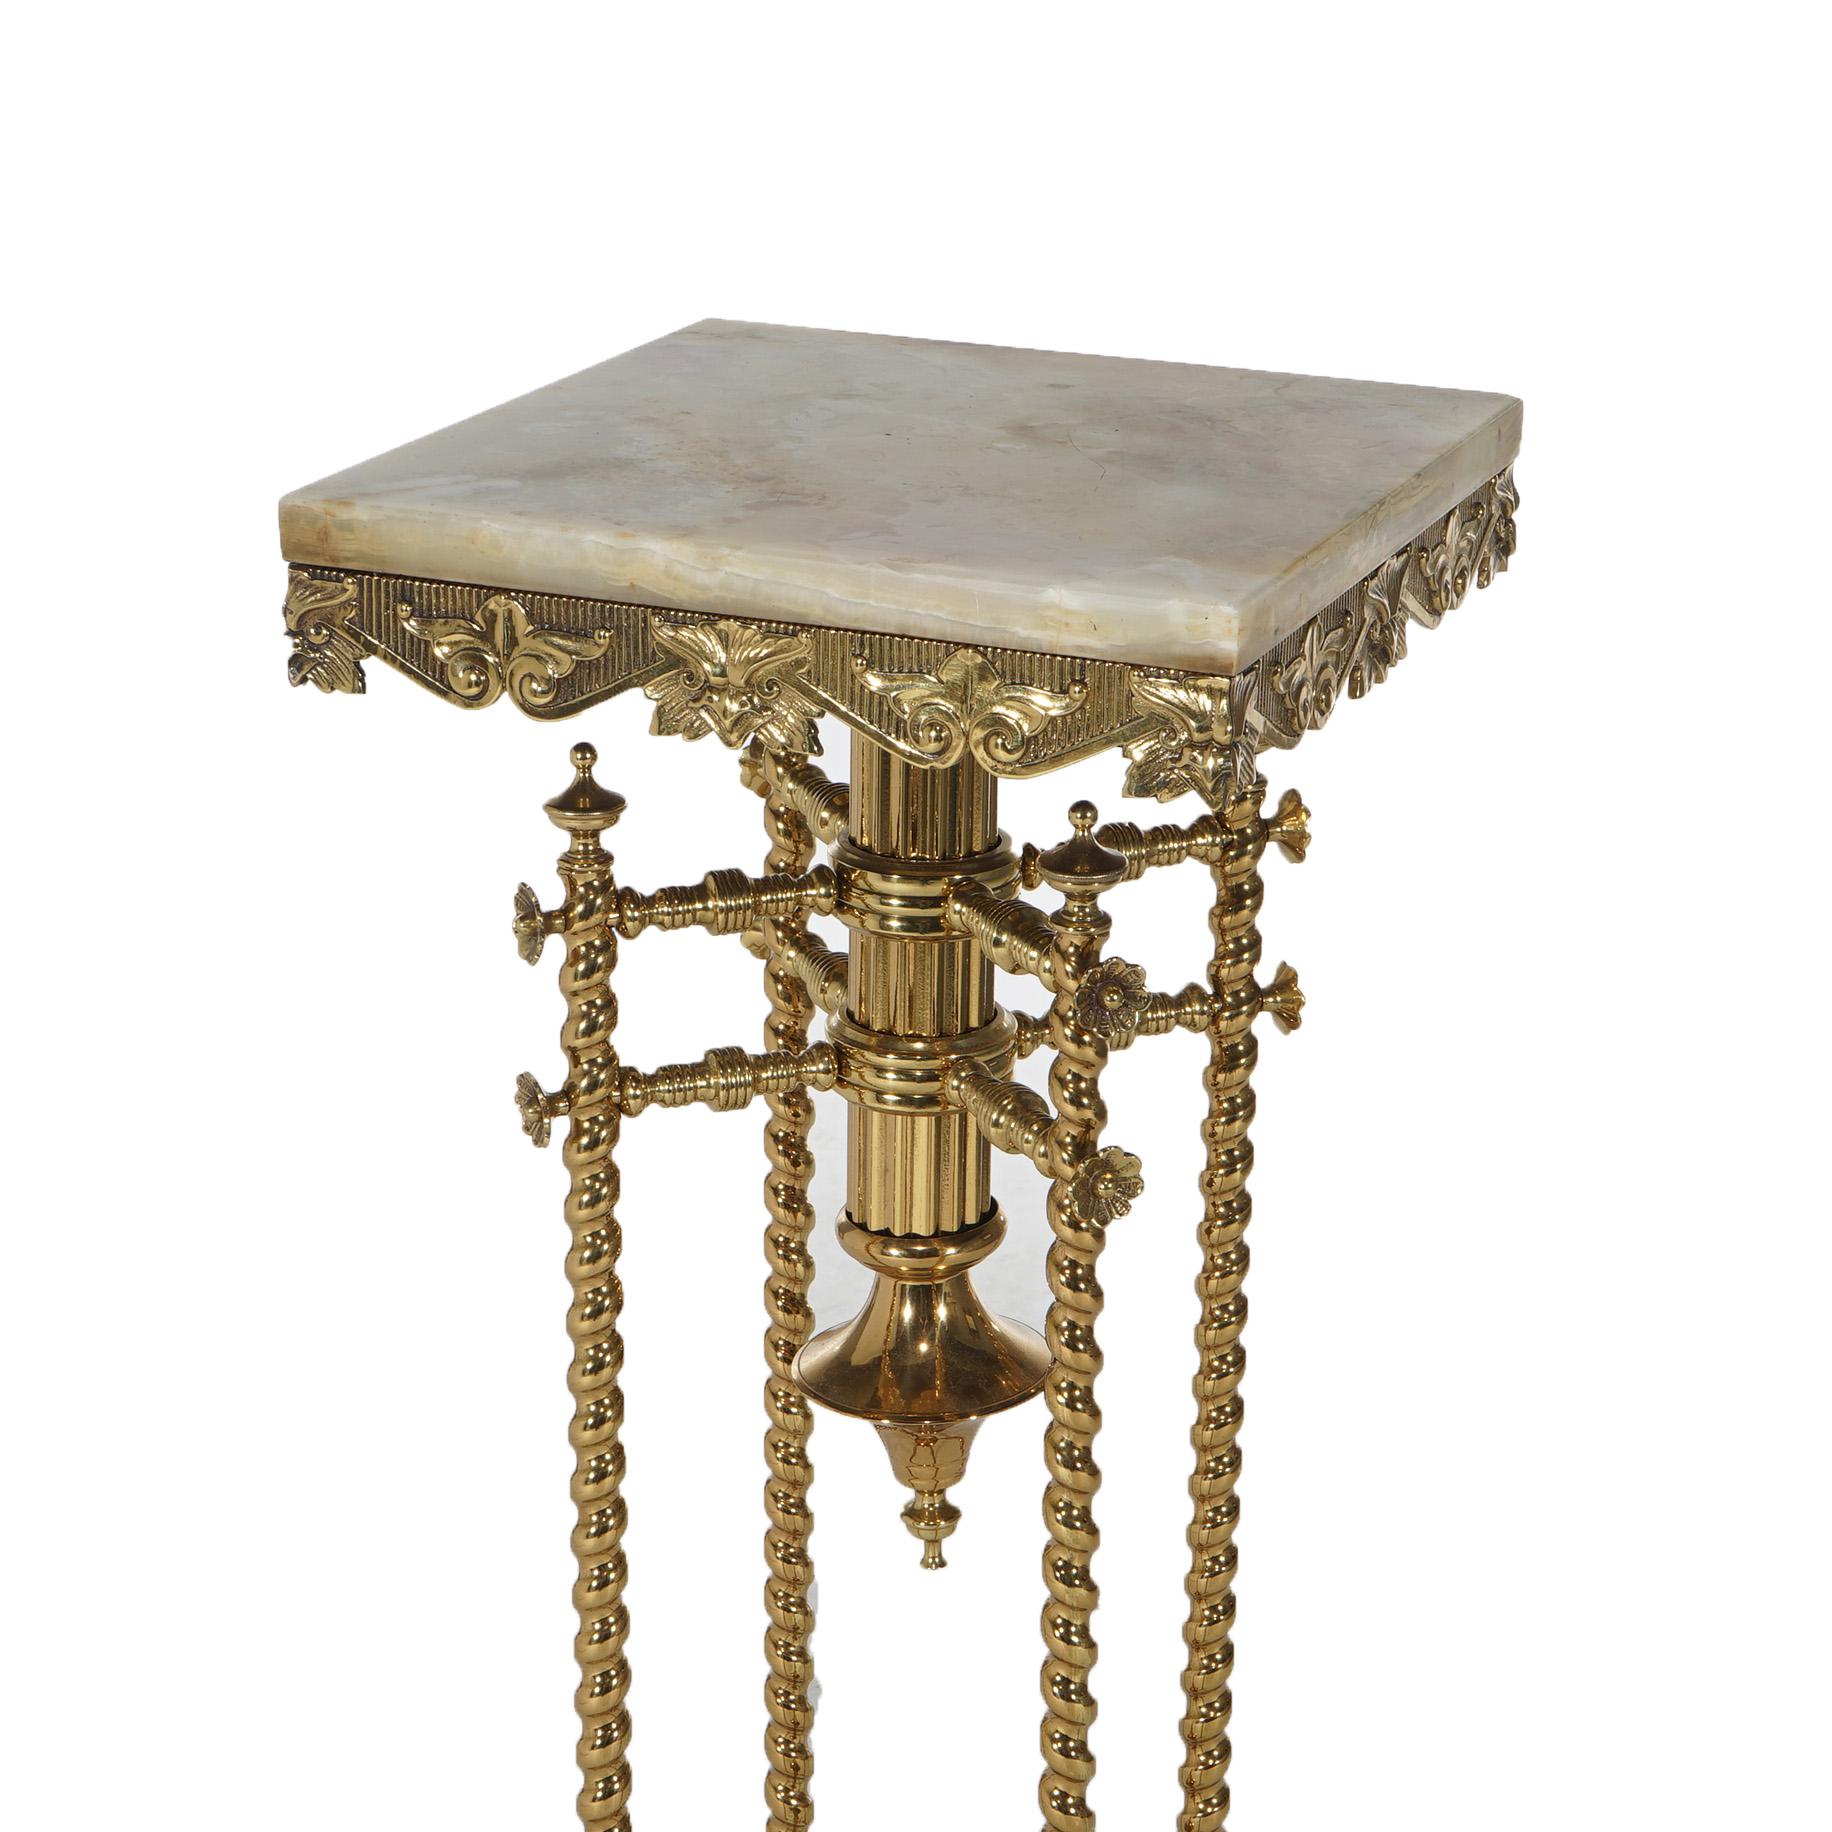 ***Ask About Reduced In-House Delivery Rates - Reliable Professional Service & Fully Insured***

Antique Aesthetic Brass Marble Top Plant Stand in the Manner of Bradley & Hubbard with Rope Twist Columns and Stylized Paw Feet, c1890

Measures- 35''H